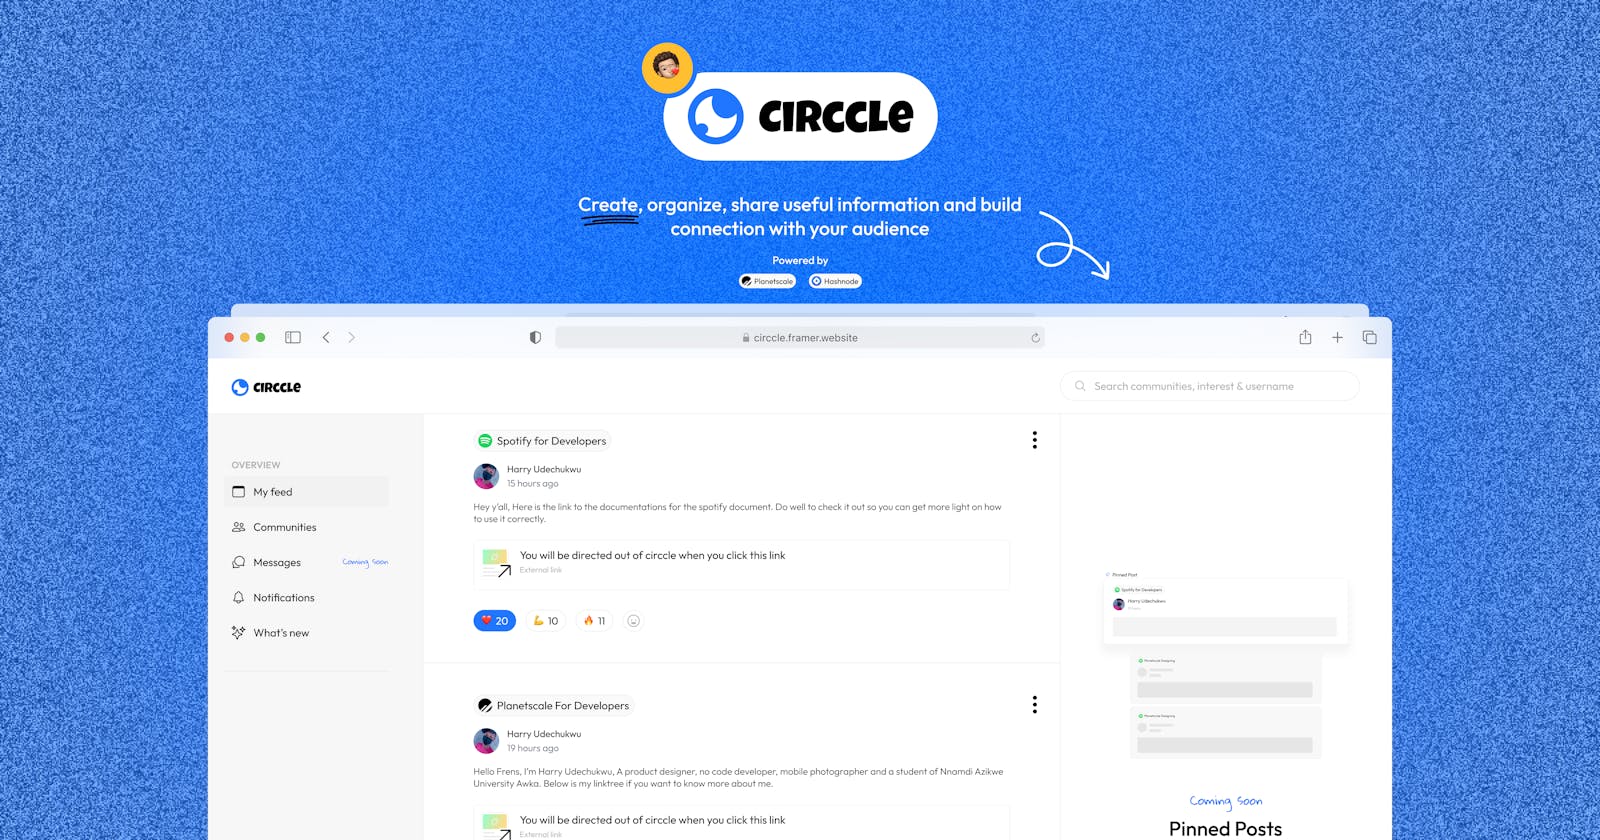 Meet Circcle : The Home For Industry Community.